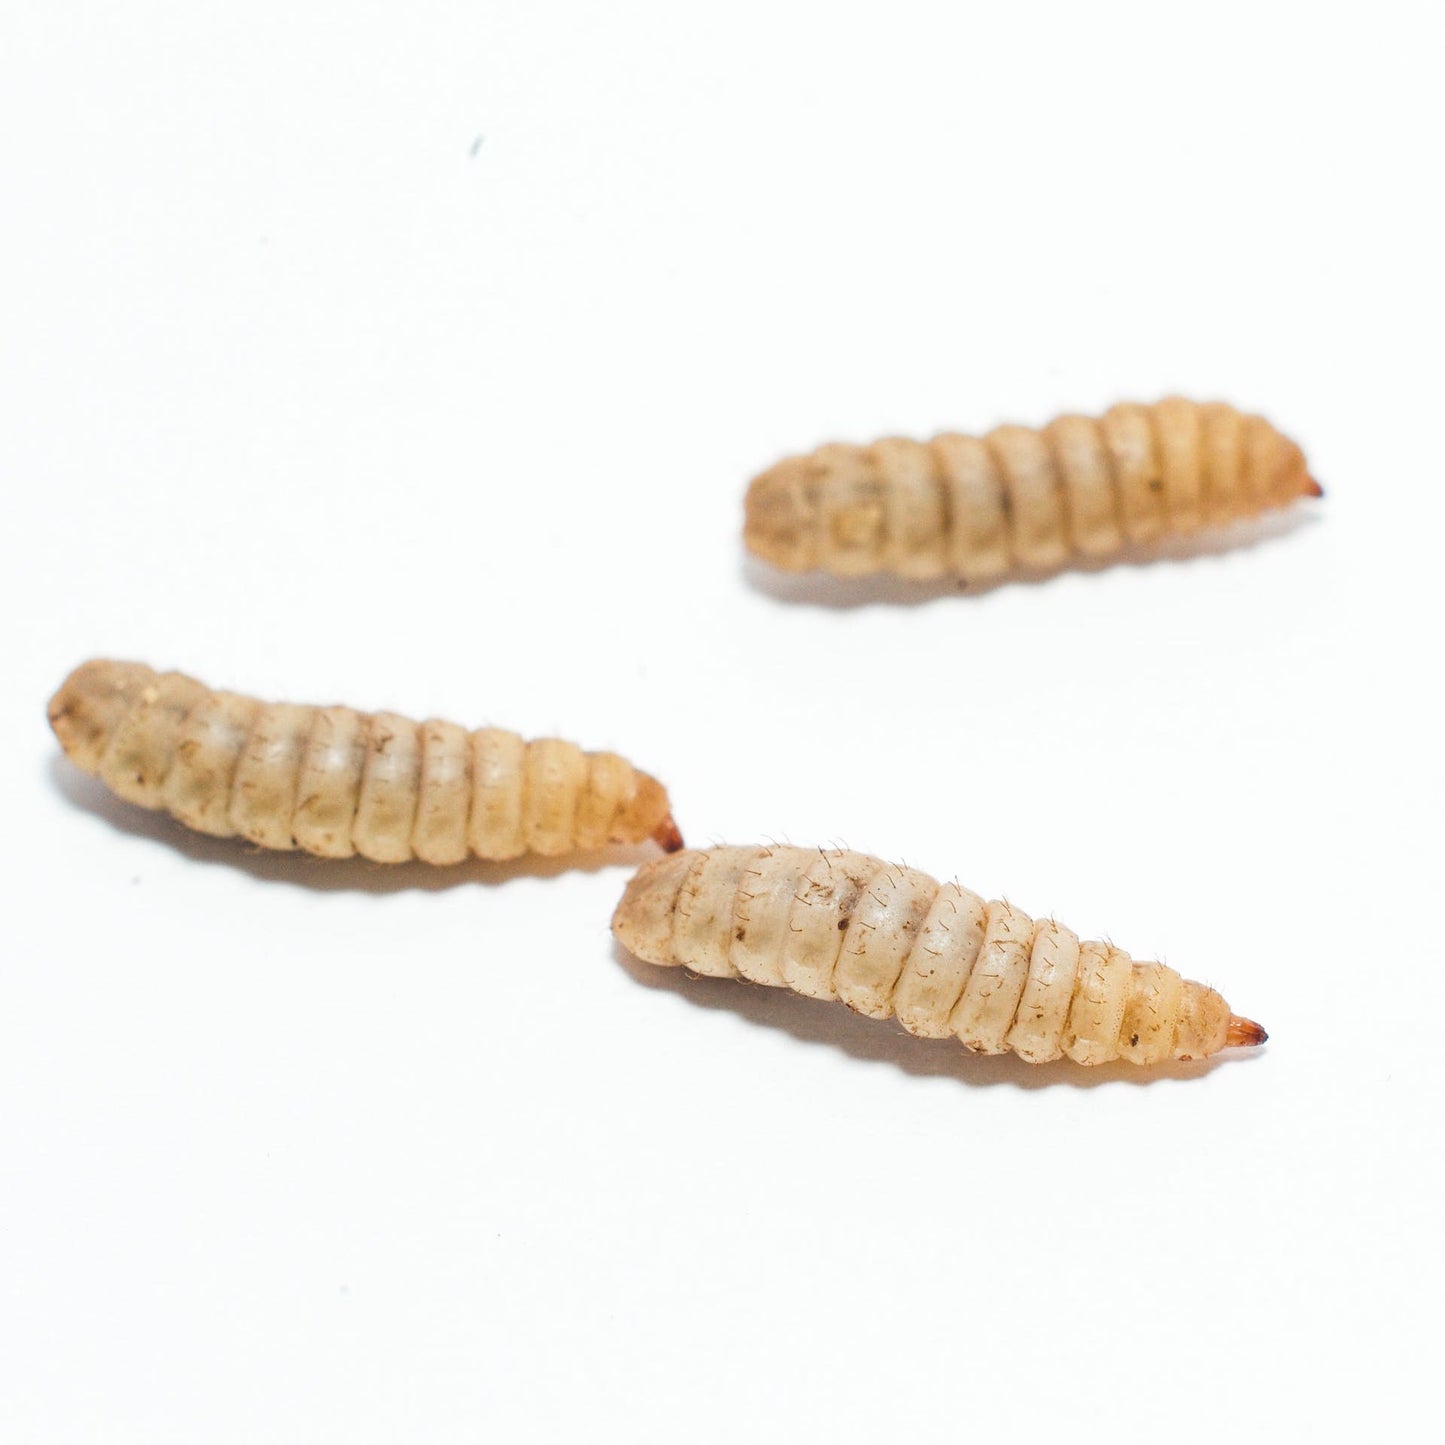 Live BSF Larvae 250g - Monthly FREE DELIVERY